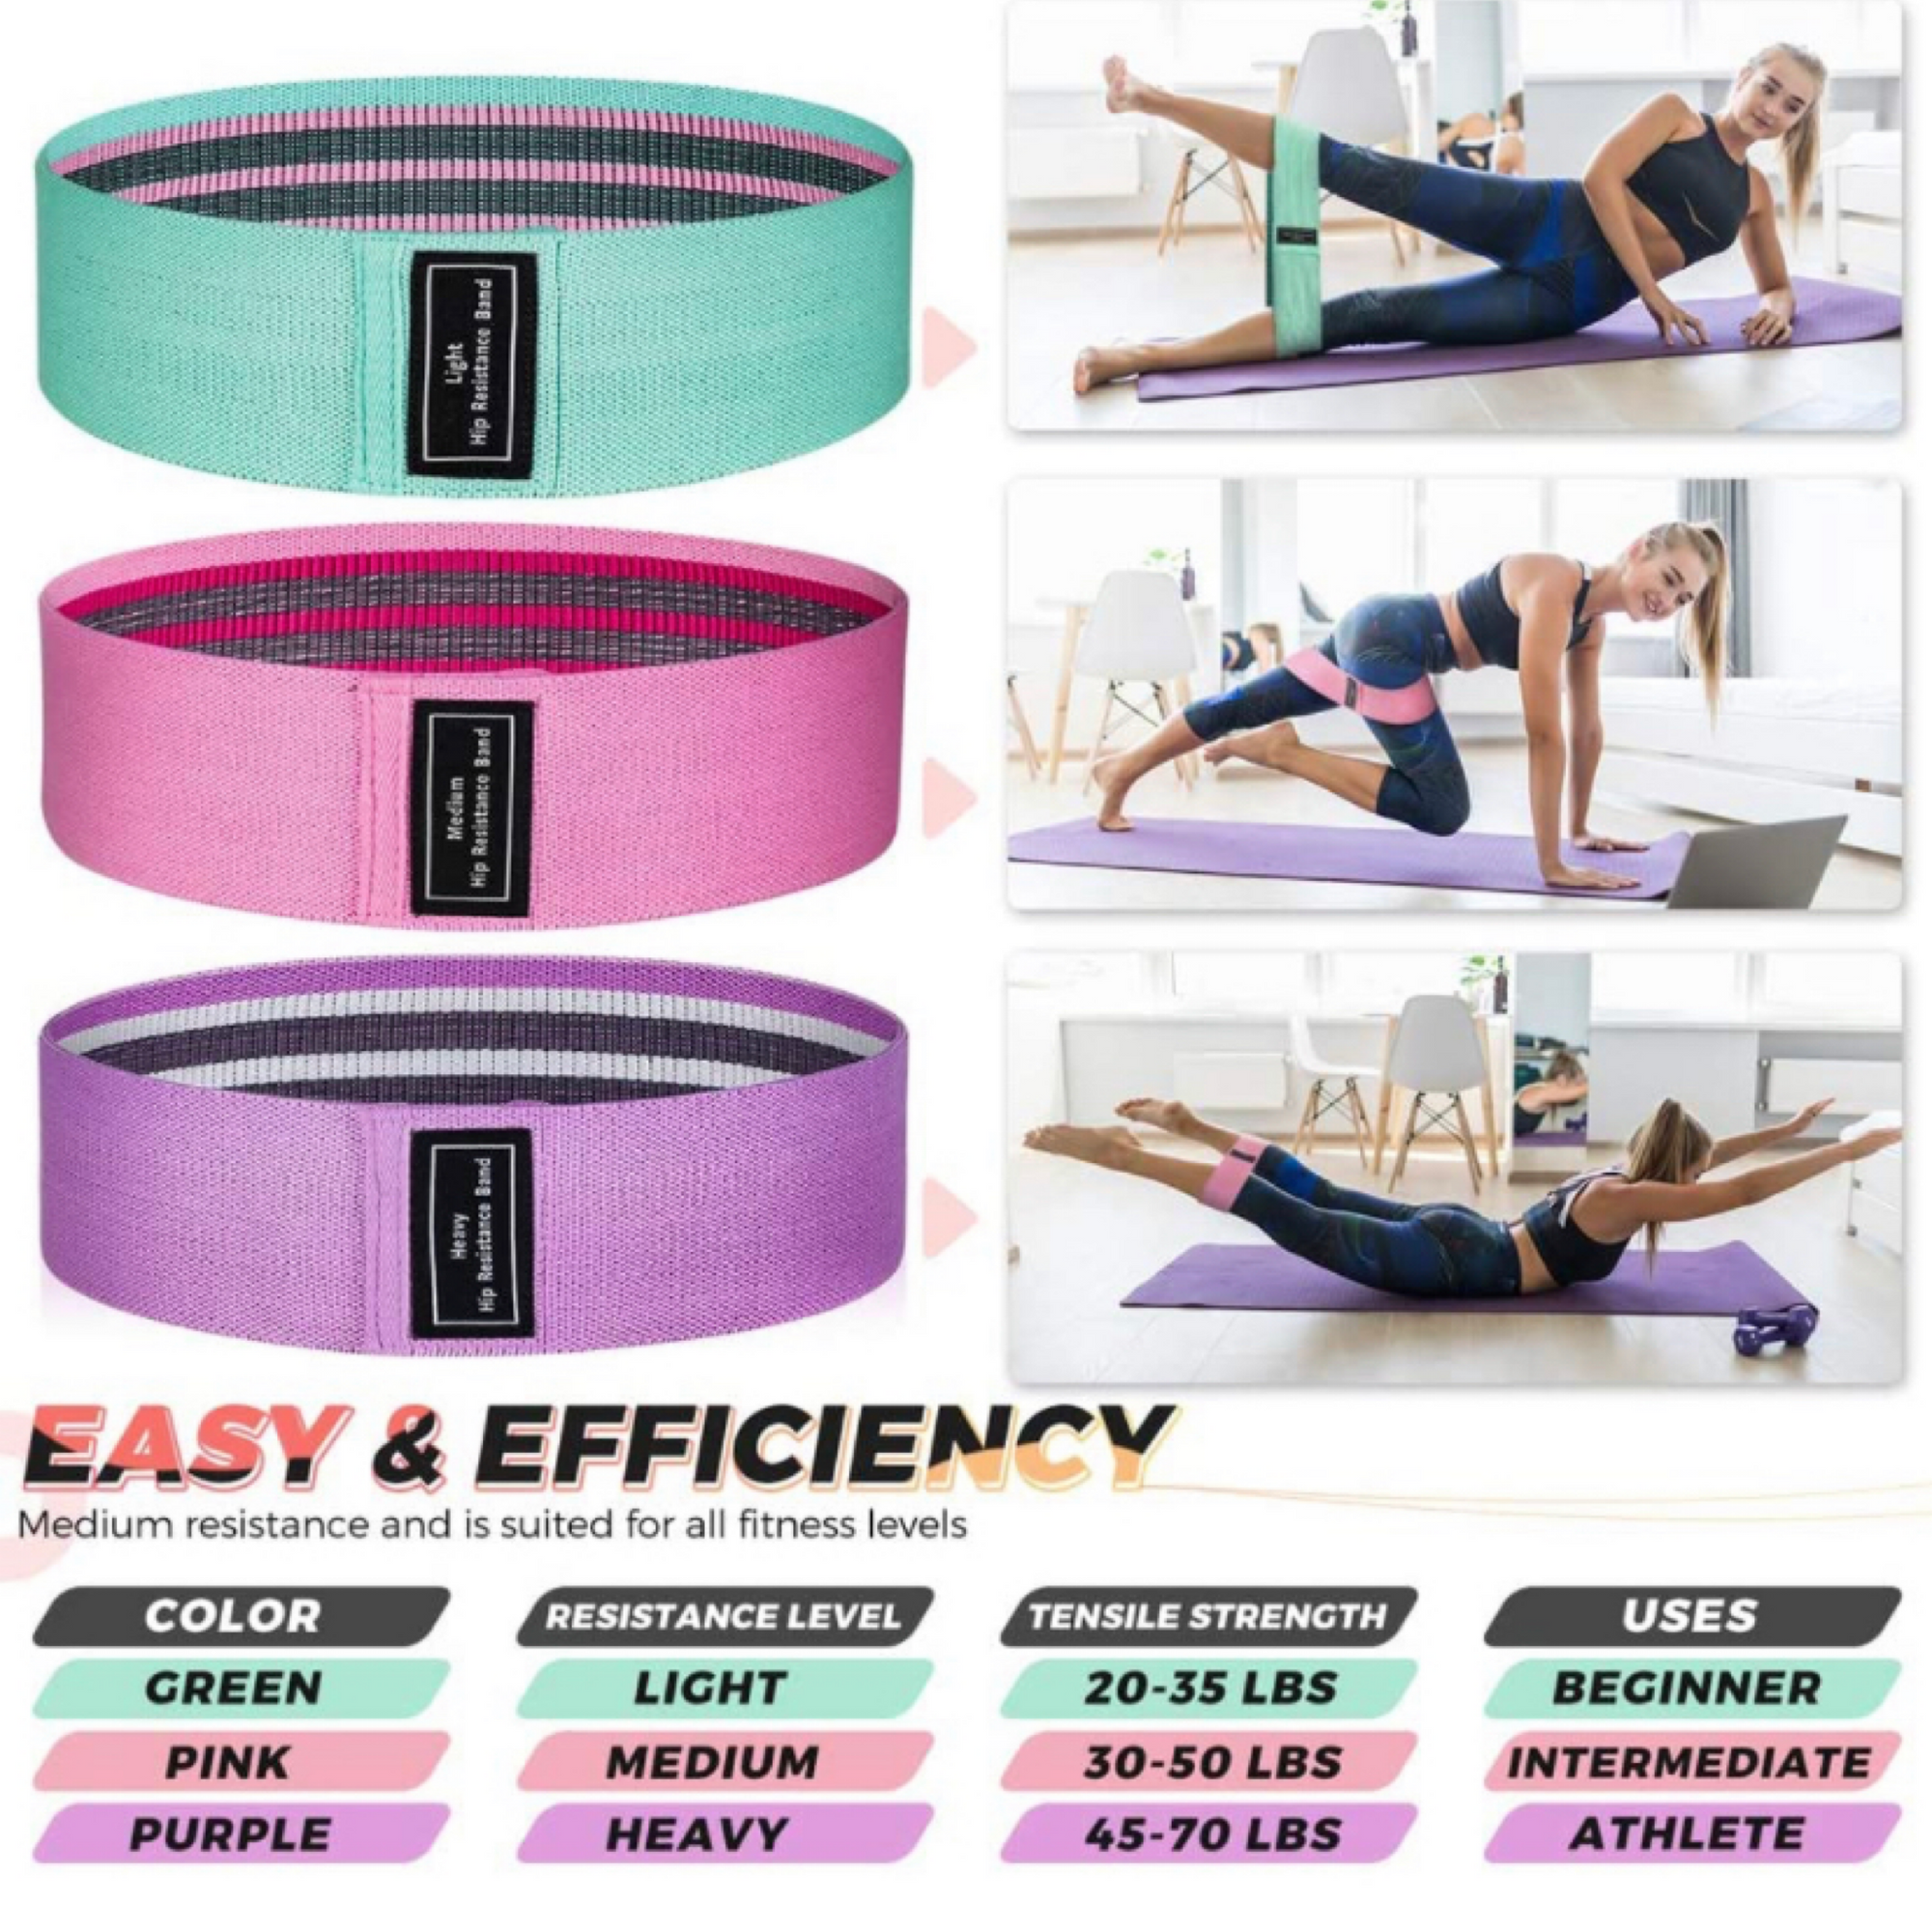  MummyStrength Resistance Bands for Men and Women. The